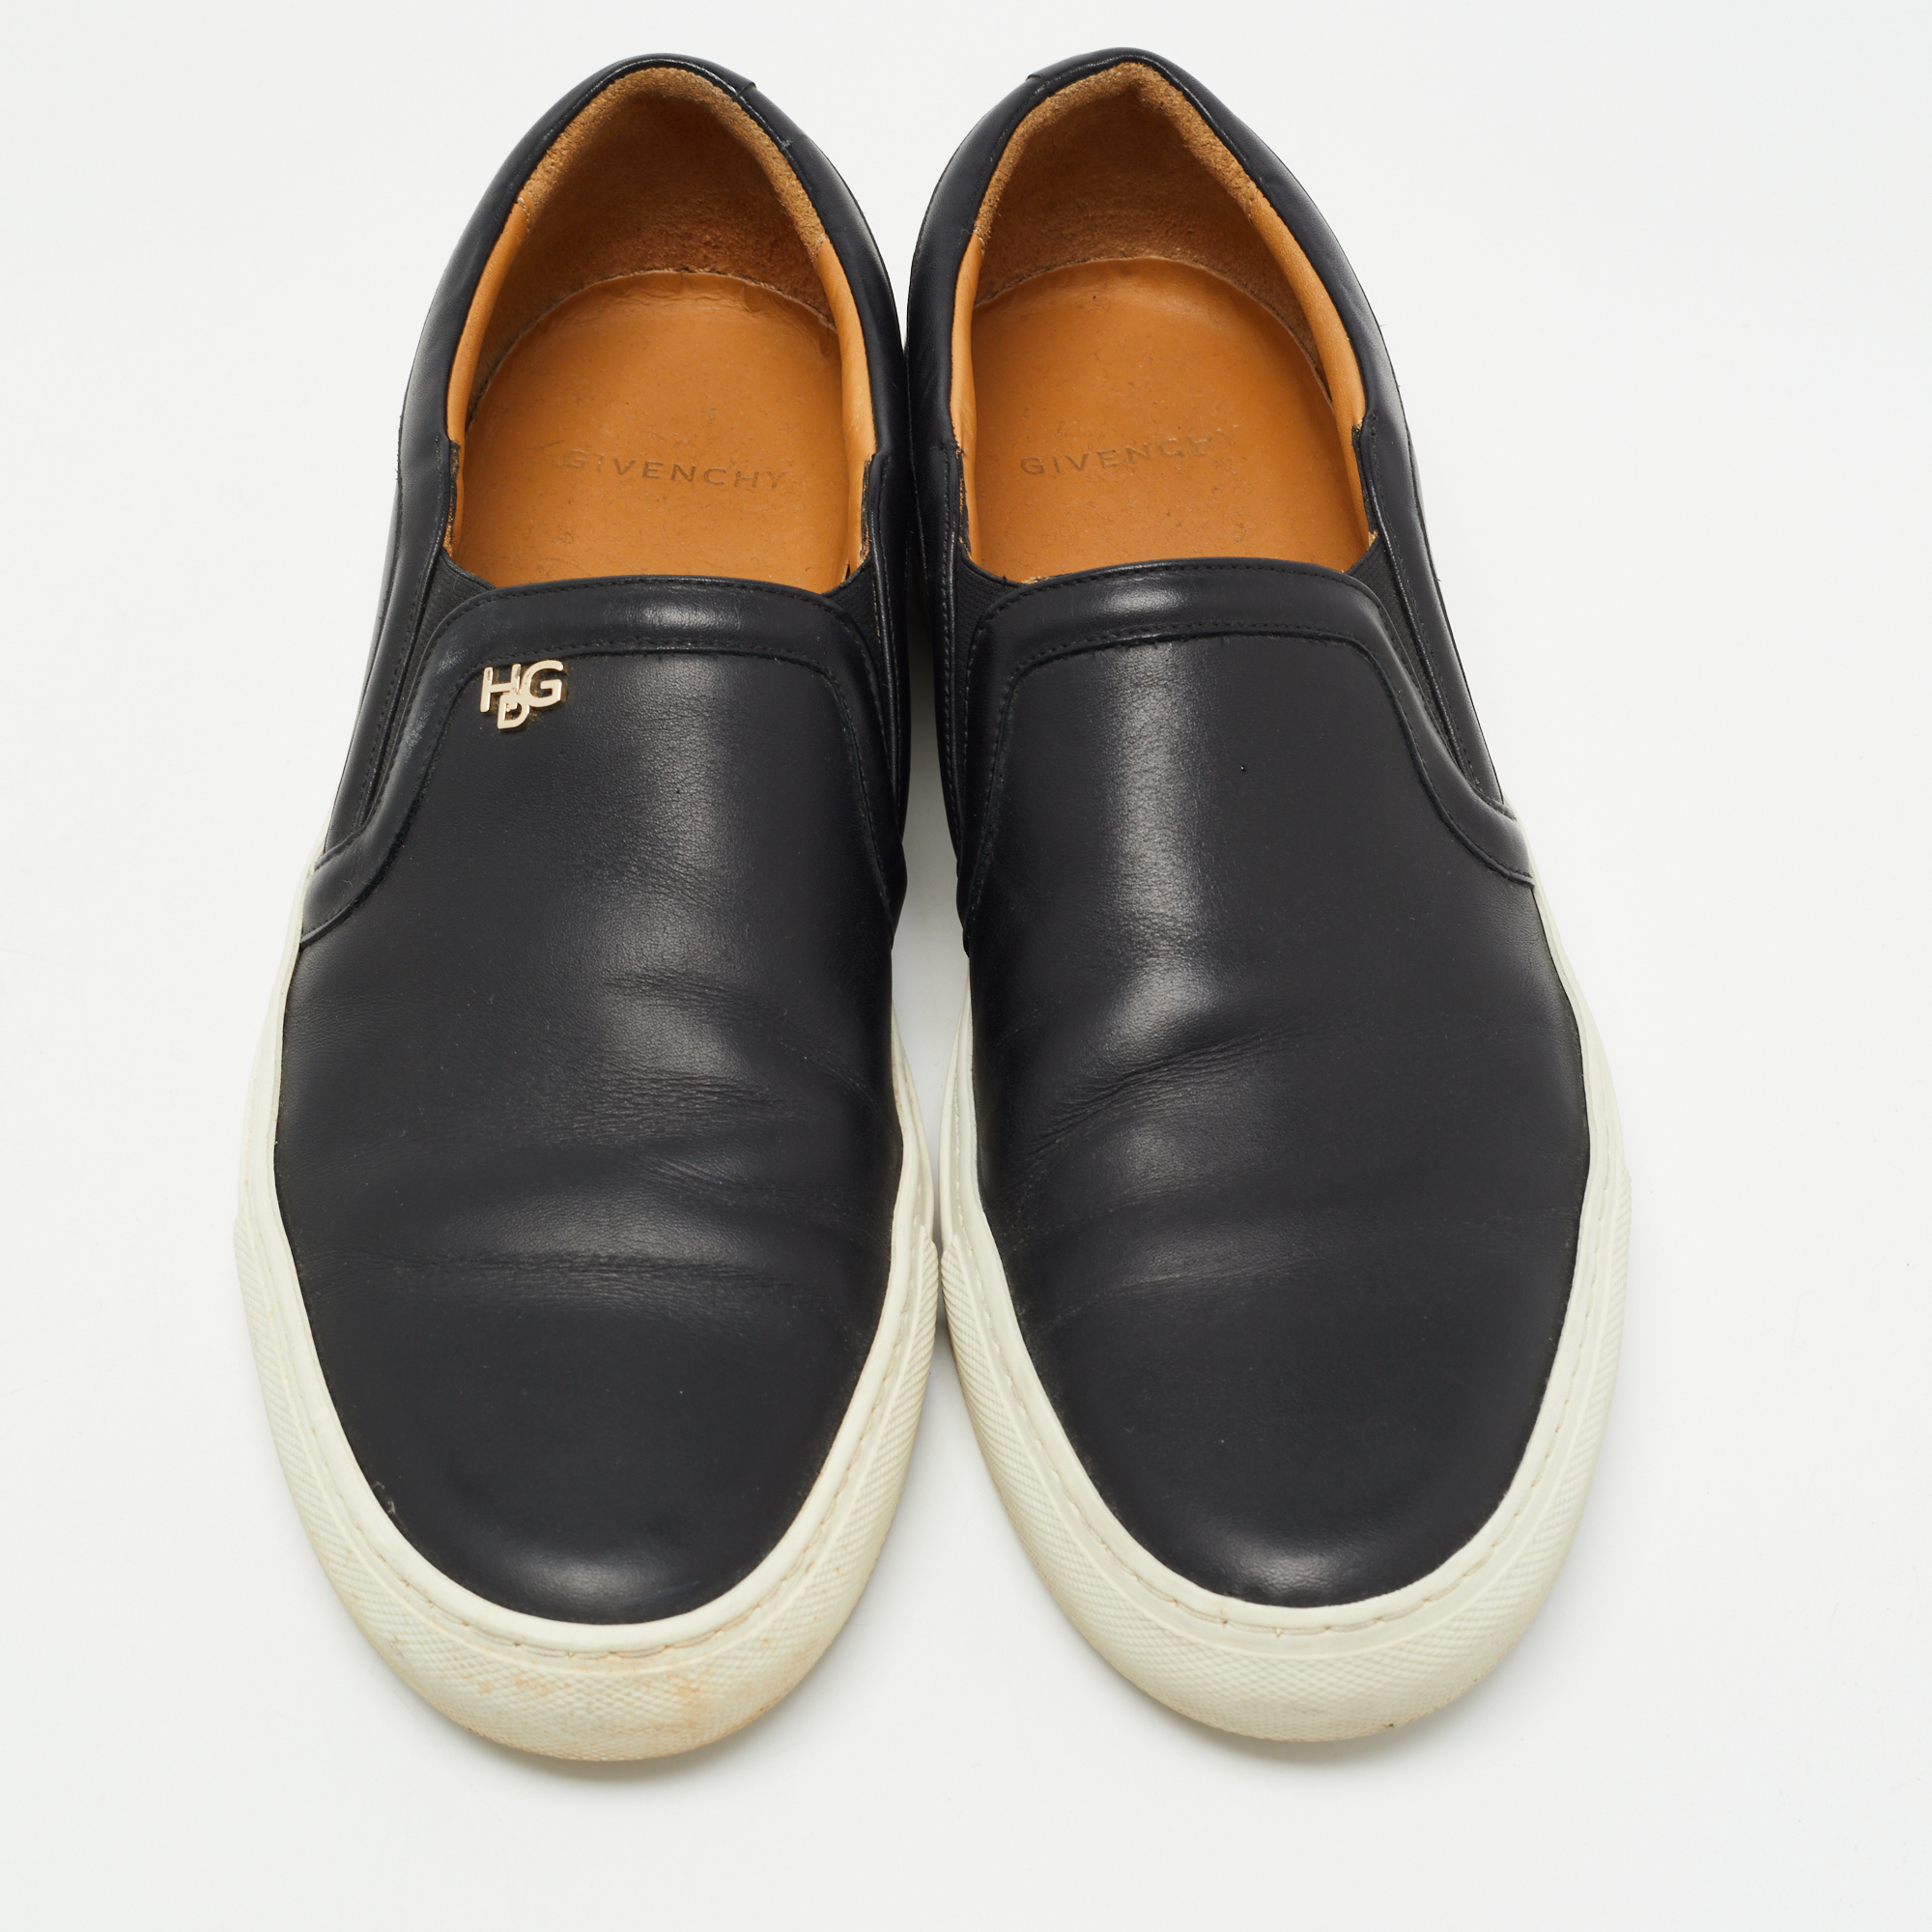 Givenchy Black Leather Slip On Sneakers Size 44